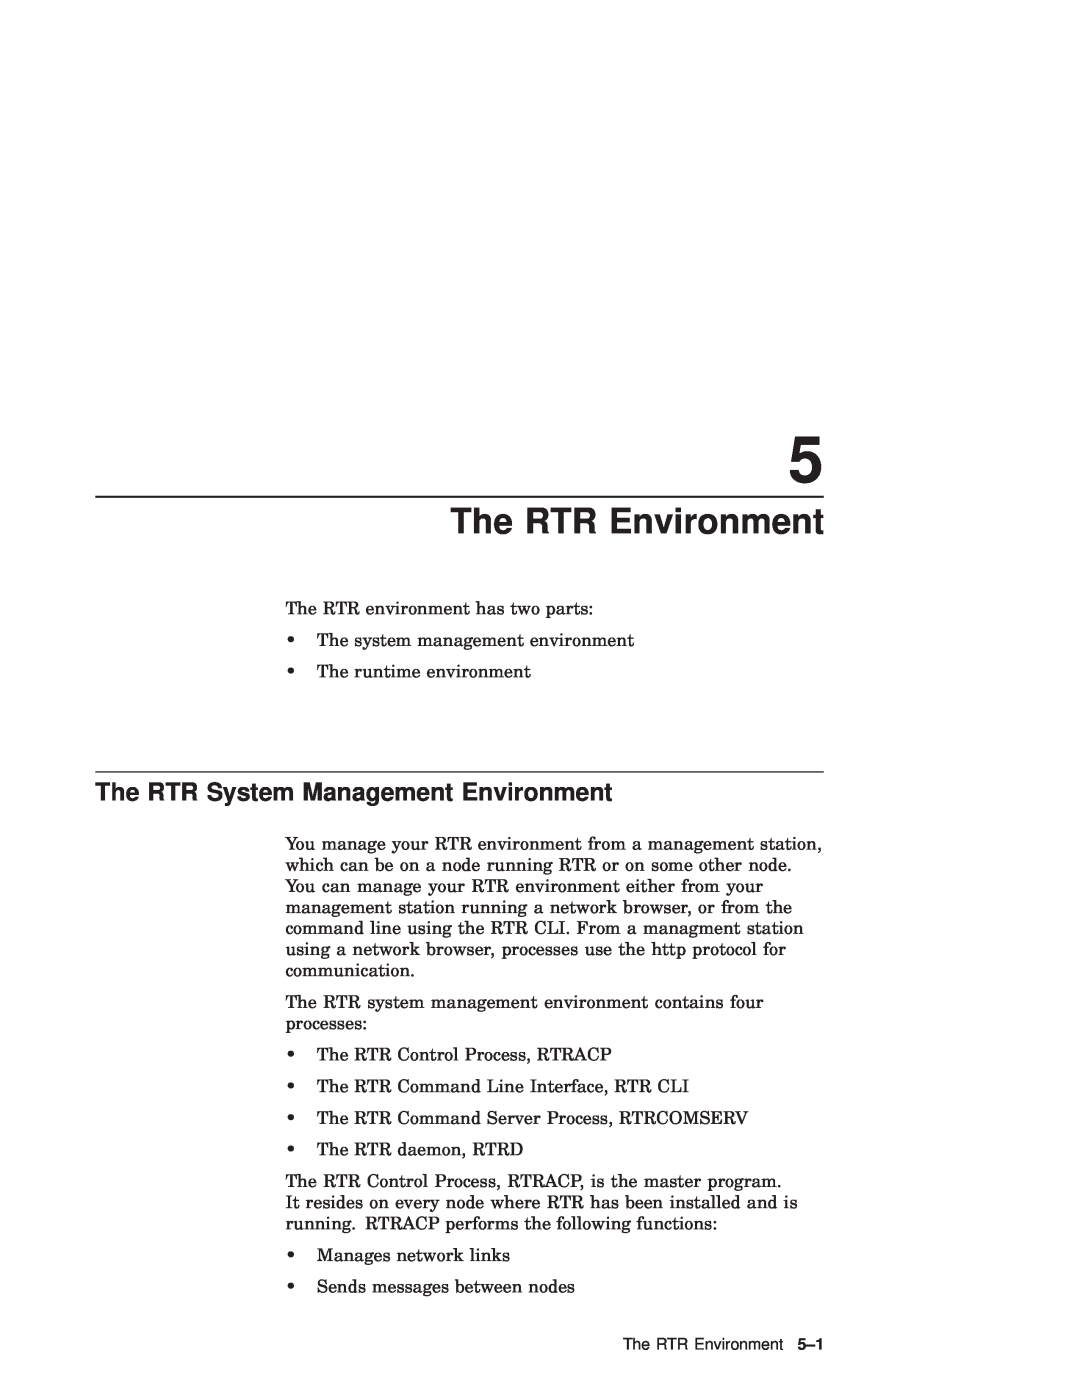 Compaq Reliable Transaction Router manual The RTR Environment, The RTR System Management Environment 